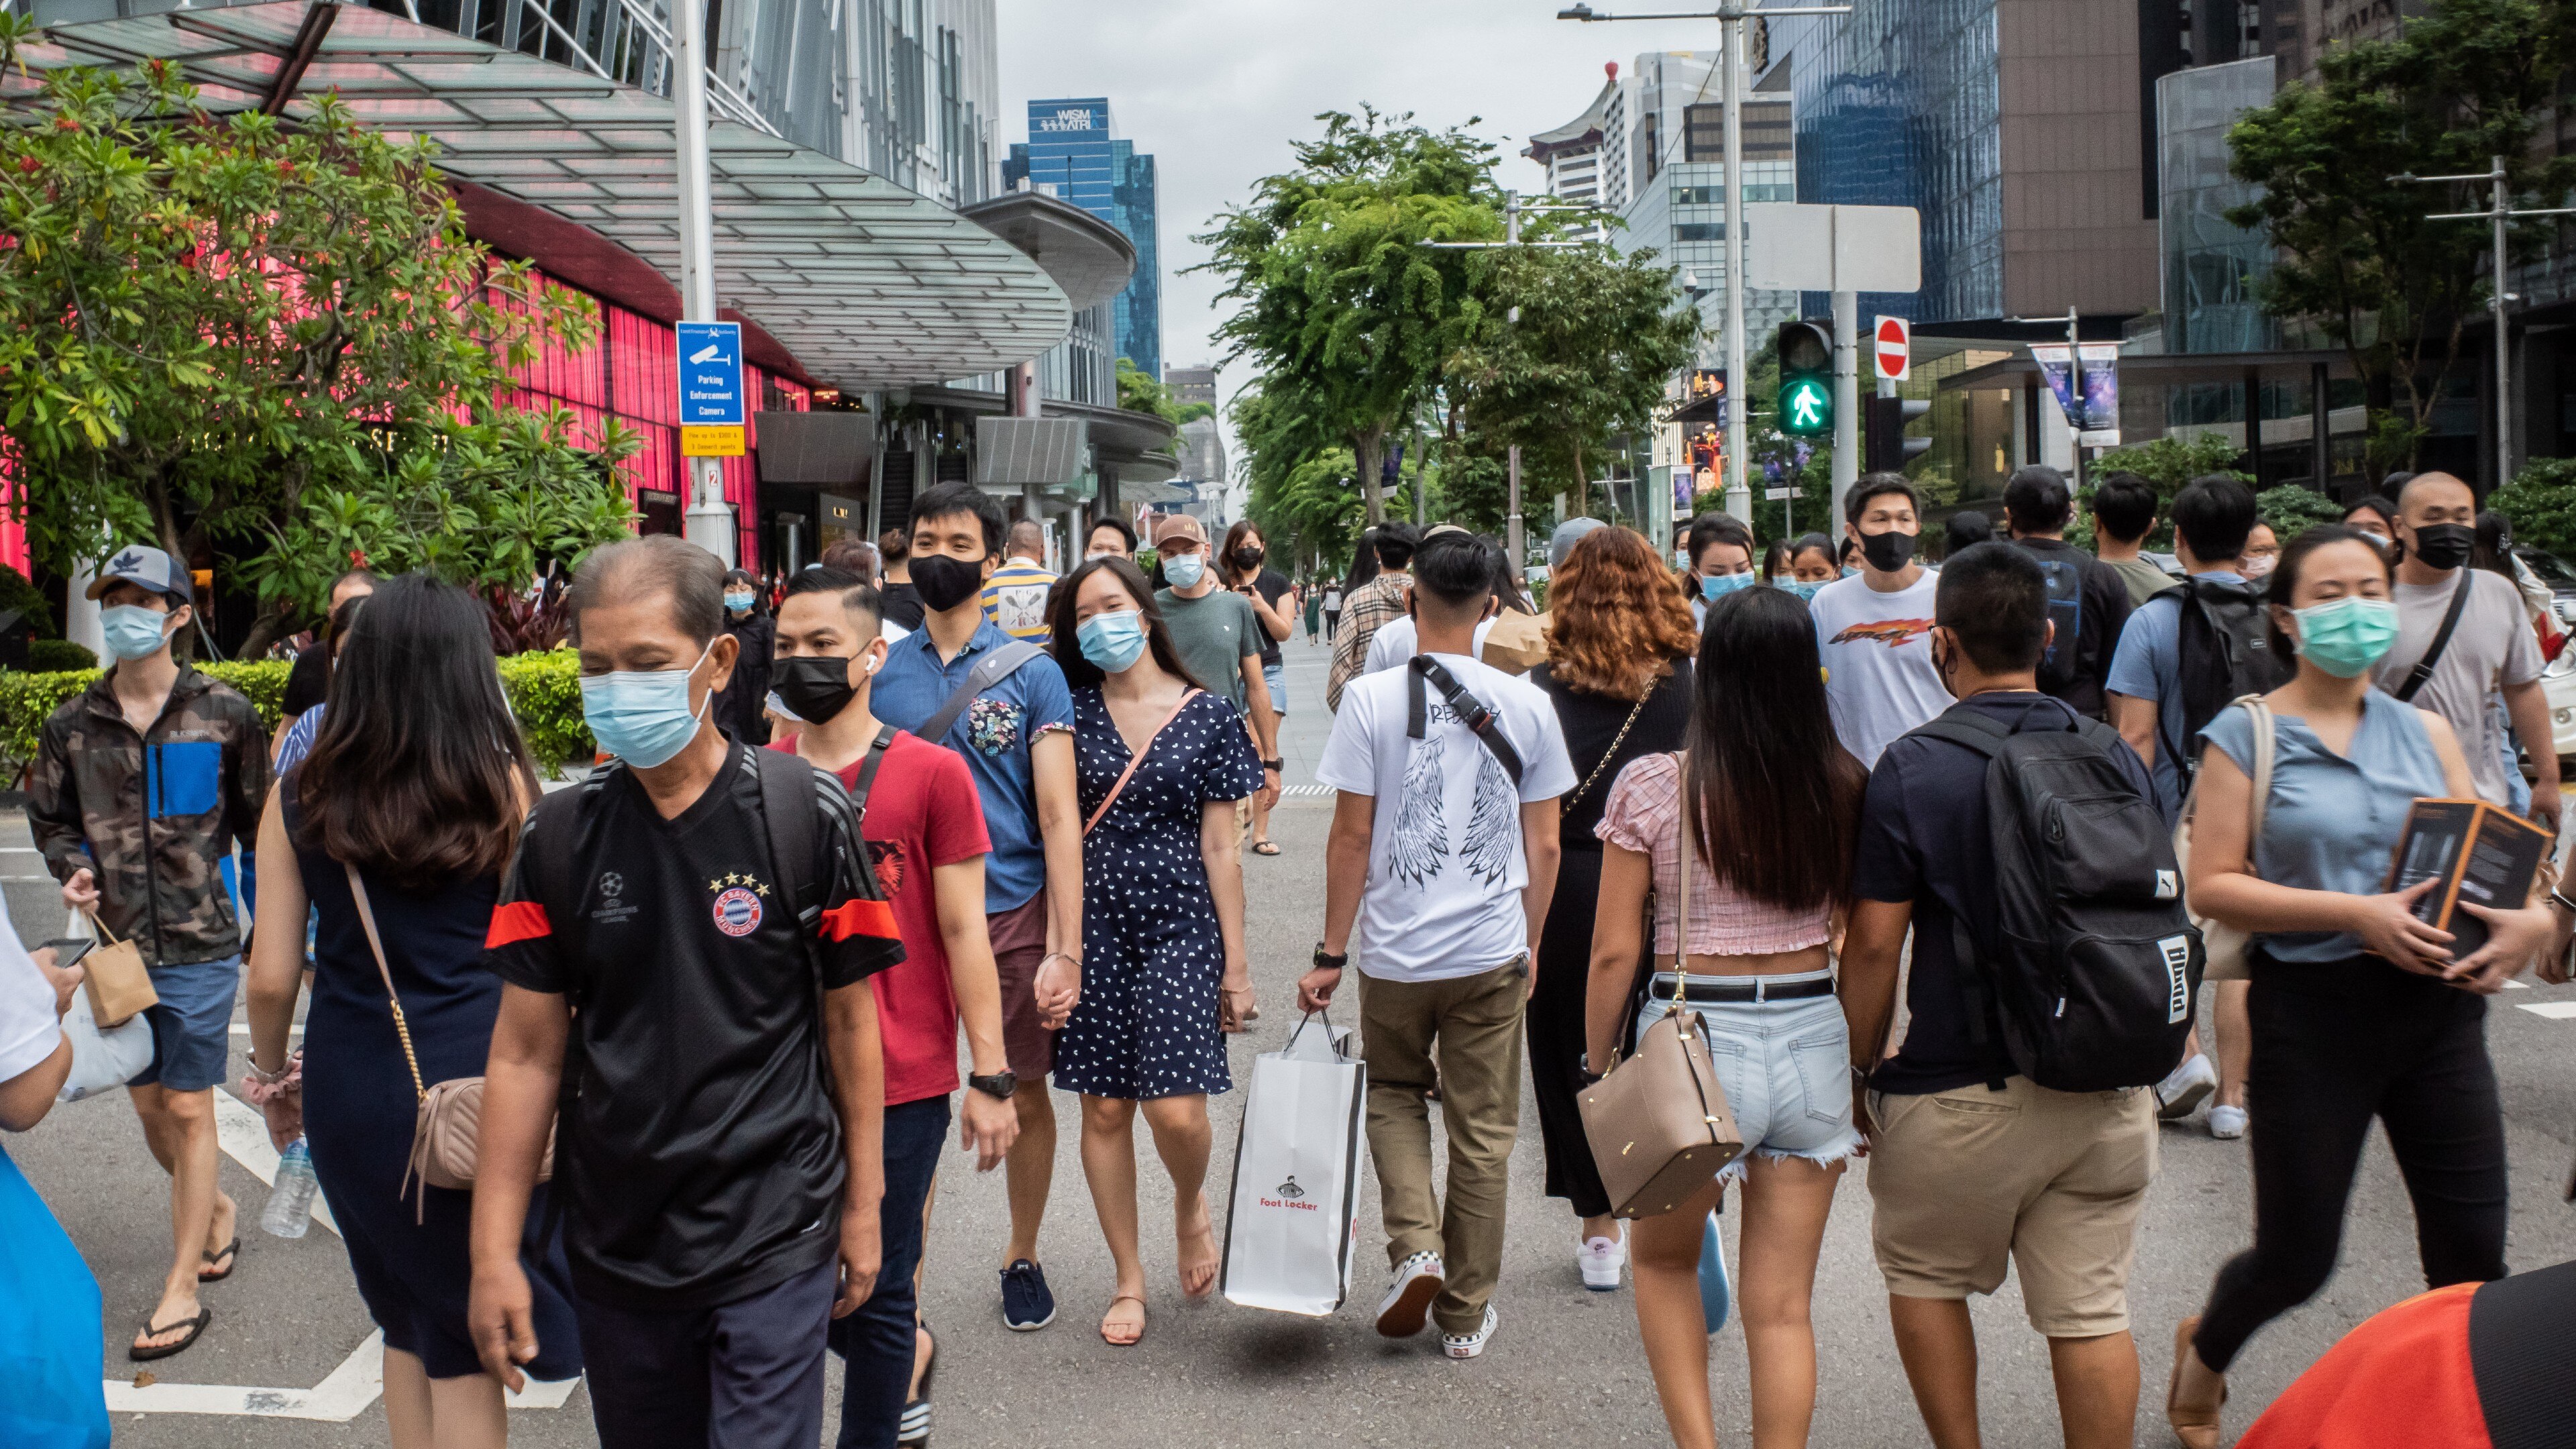 People wearing face masks as a preventive measure against the spread of covid-19 walk along Orchard Road, a famous shopping district in Singapore.